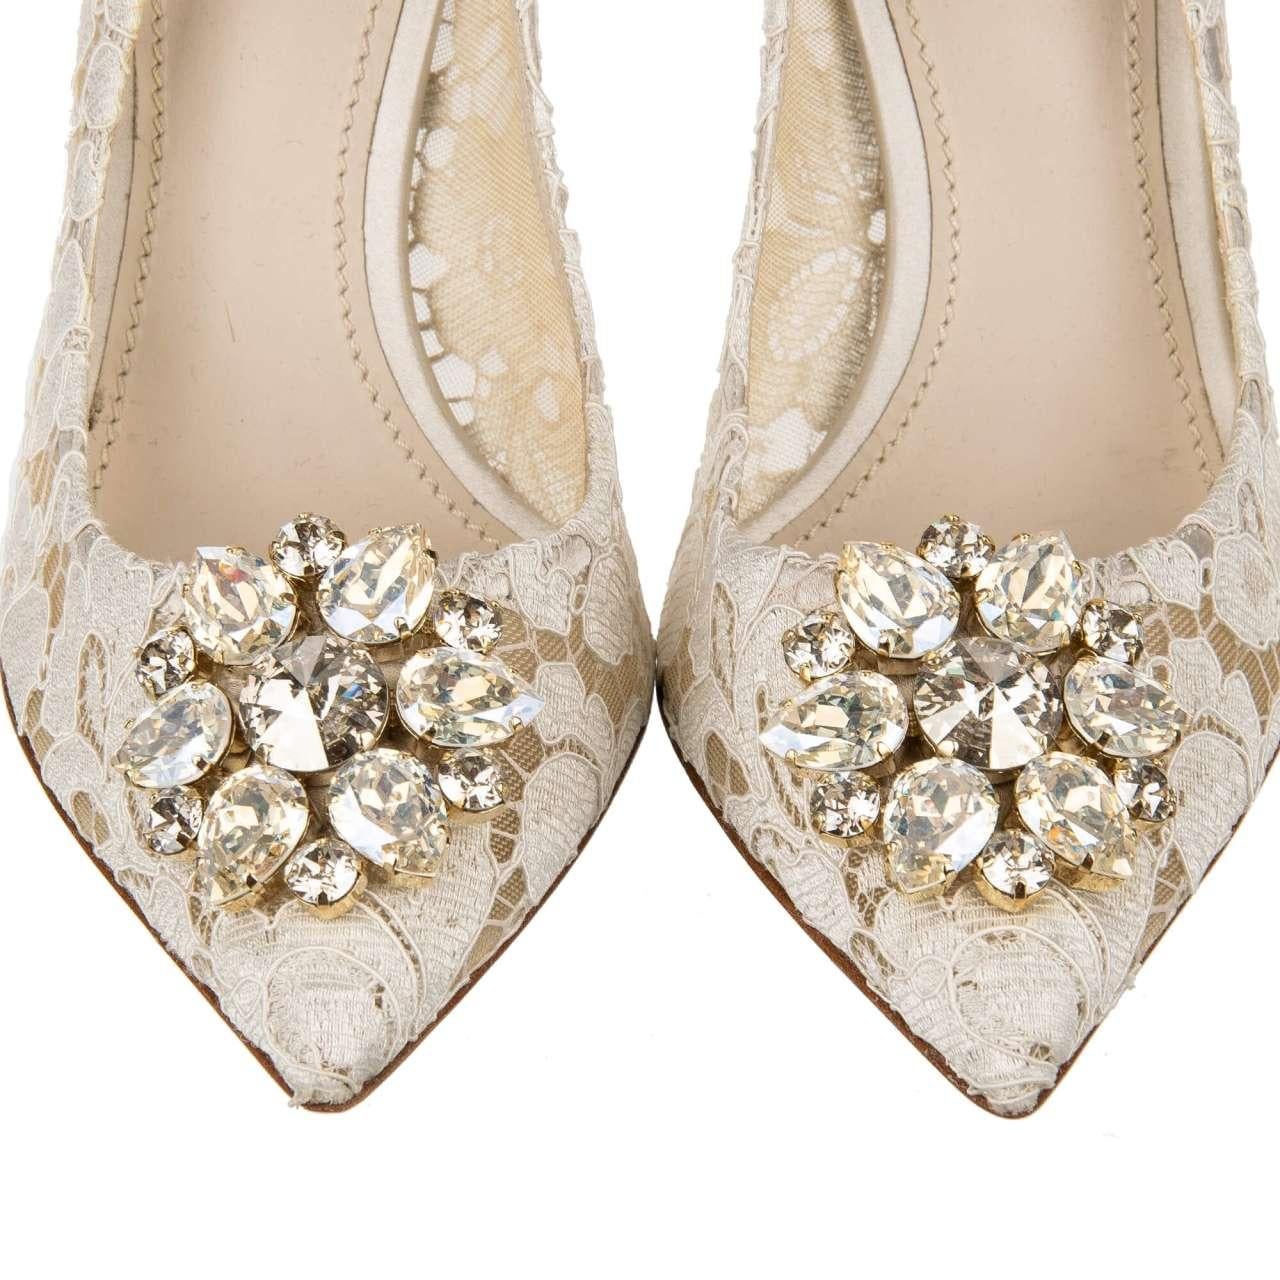 Women's Dolce & Gabbana Taormina Lace Pumps BELLUCCI with Crystal Brooch Beige EUR 39 For Sale